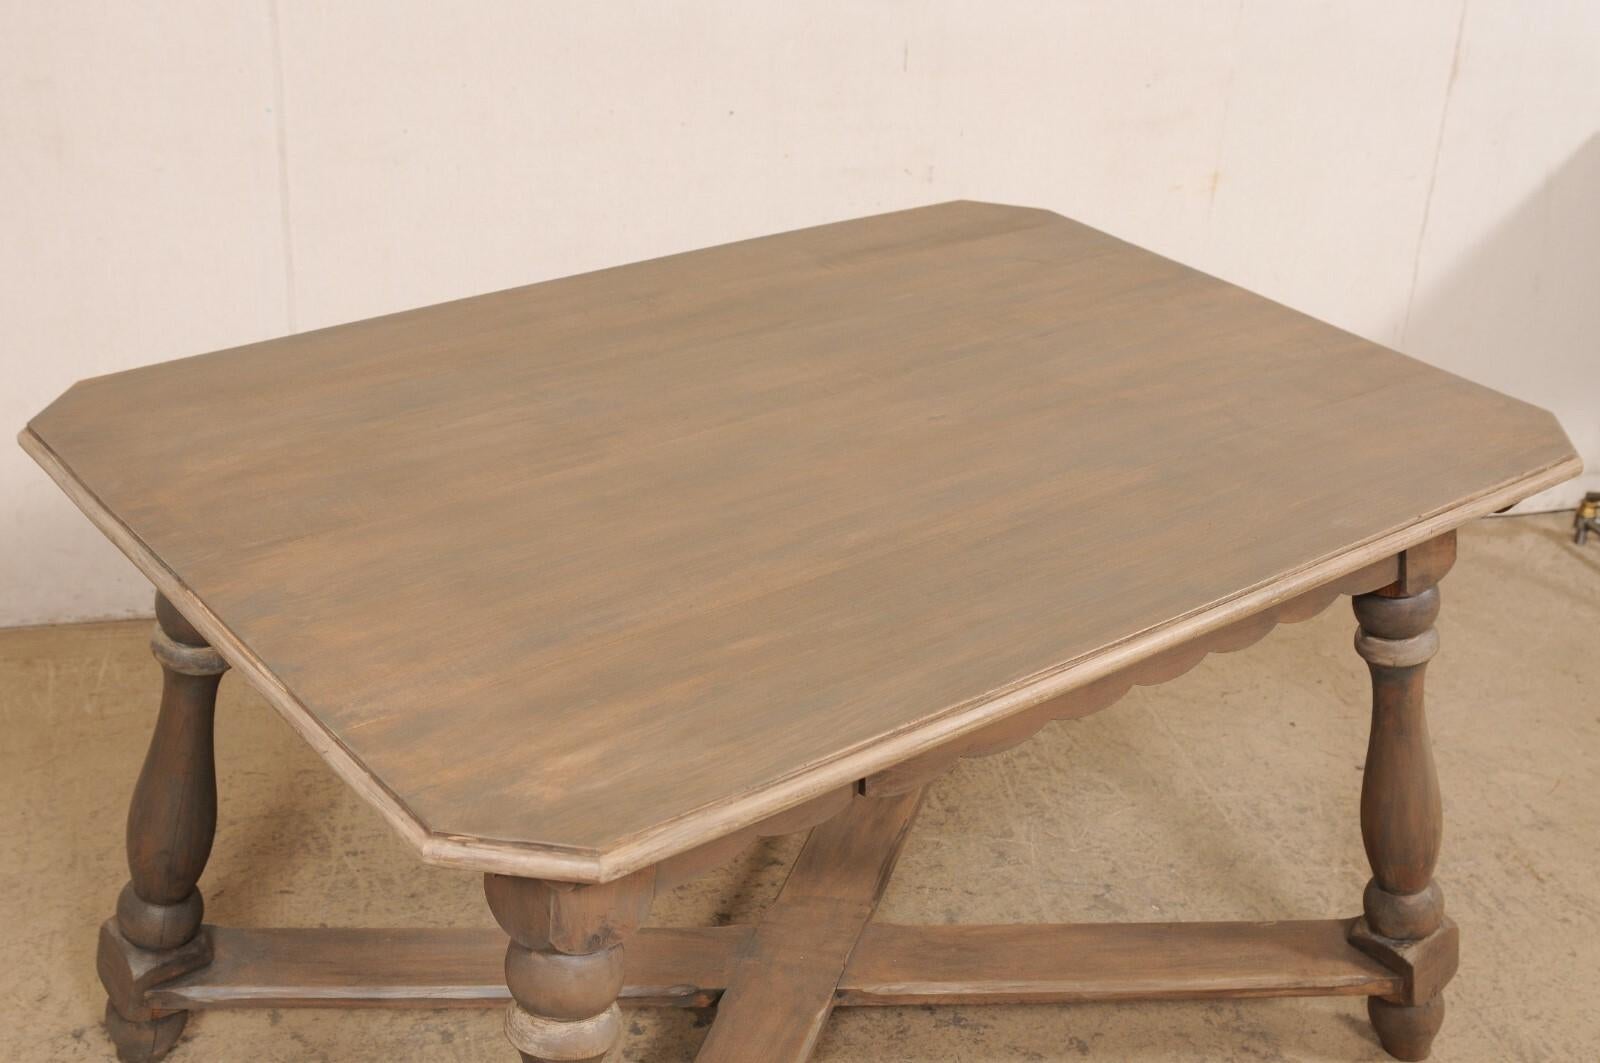 European Wooden Table w/Scalloped Apron, Nicely Turned Legs & X-Stretcher For Sale 6